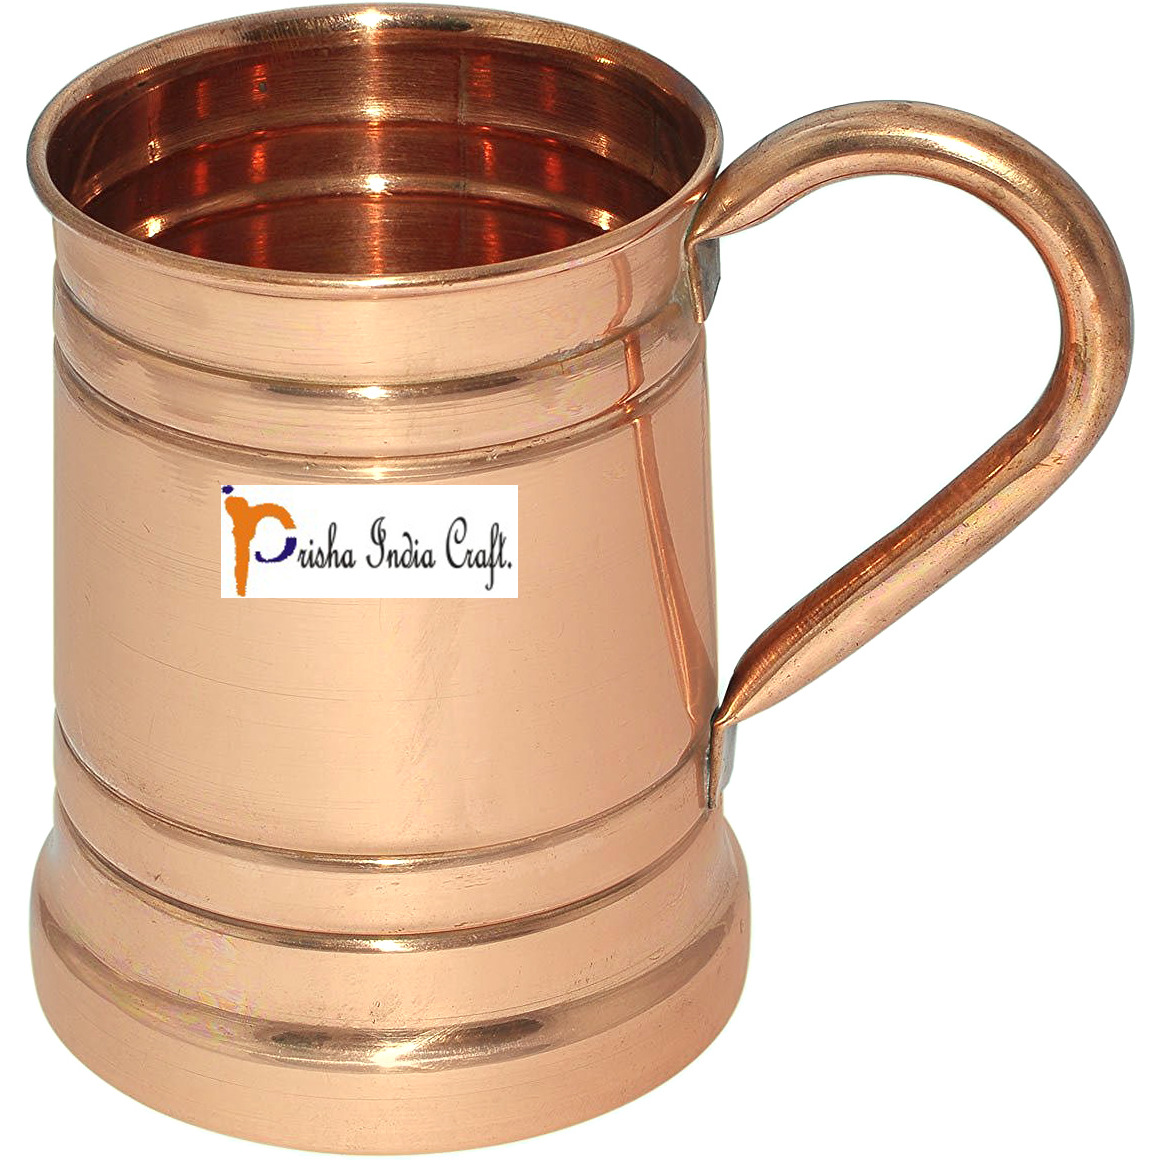 Set of 2 Prisha India Craft B. Moscow Mules Copper Mug 600 ML / 20 oz - Mule Cup, Moscow Mule Cocktail Cup, Copper Mugs, Cocktail Mugs - Christmas Gift with WOODEN KEYRING